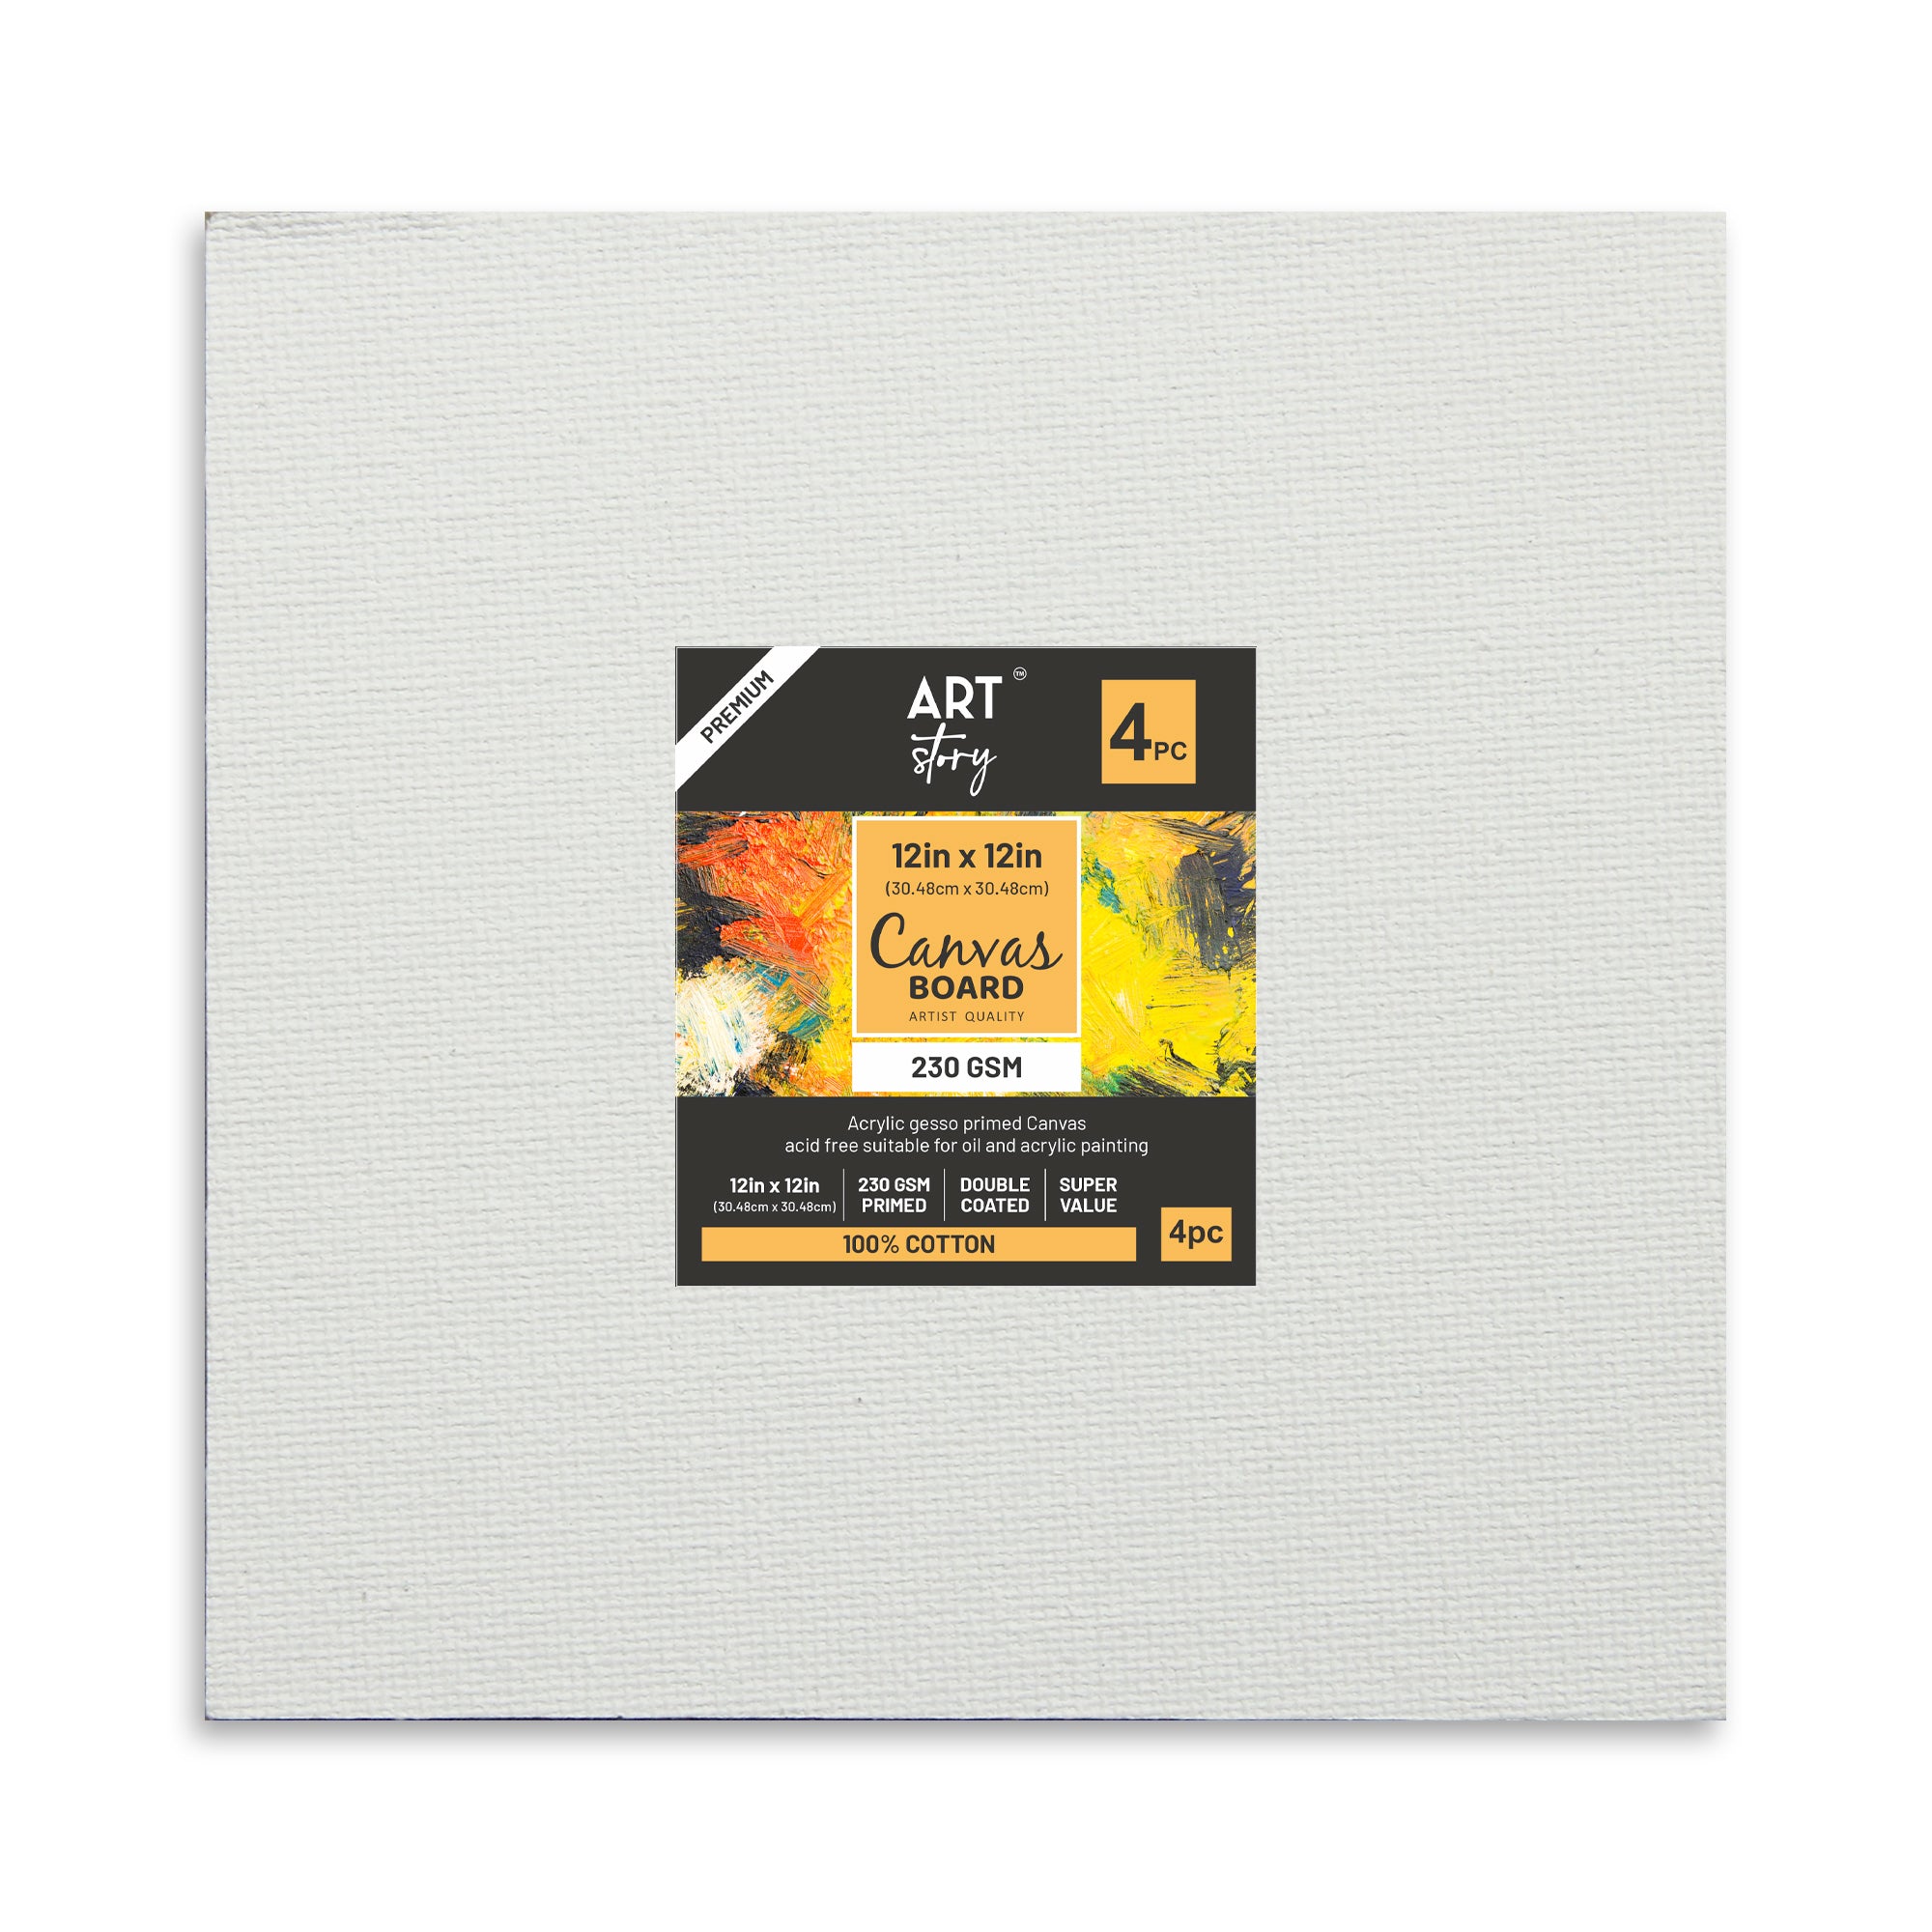 Canvas Board Square 12 X 12Inch 230Gsm 2Mm Thick 4Pc Shrink Lb